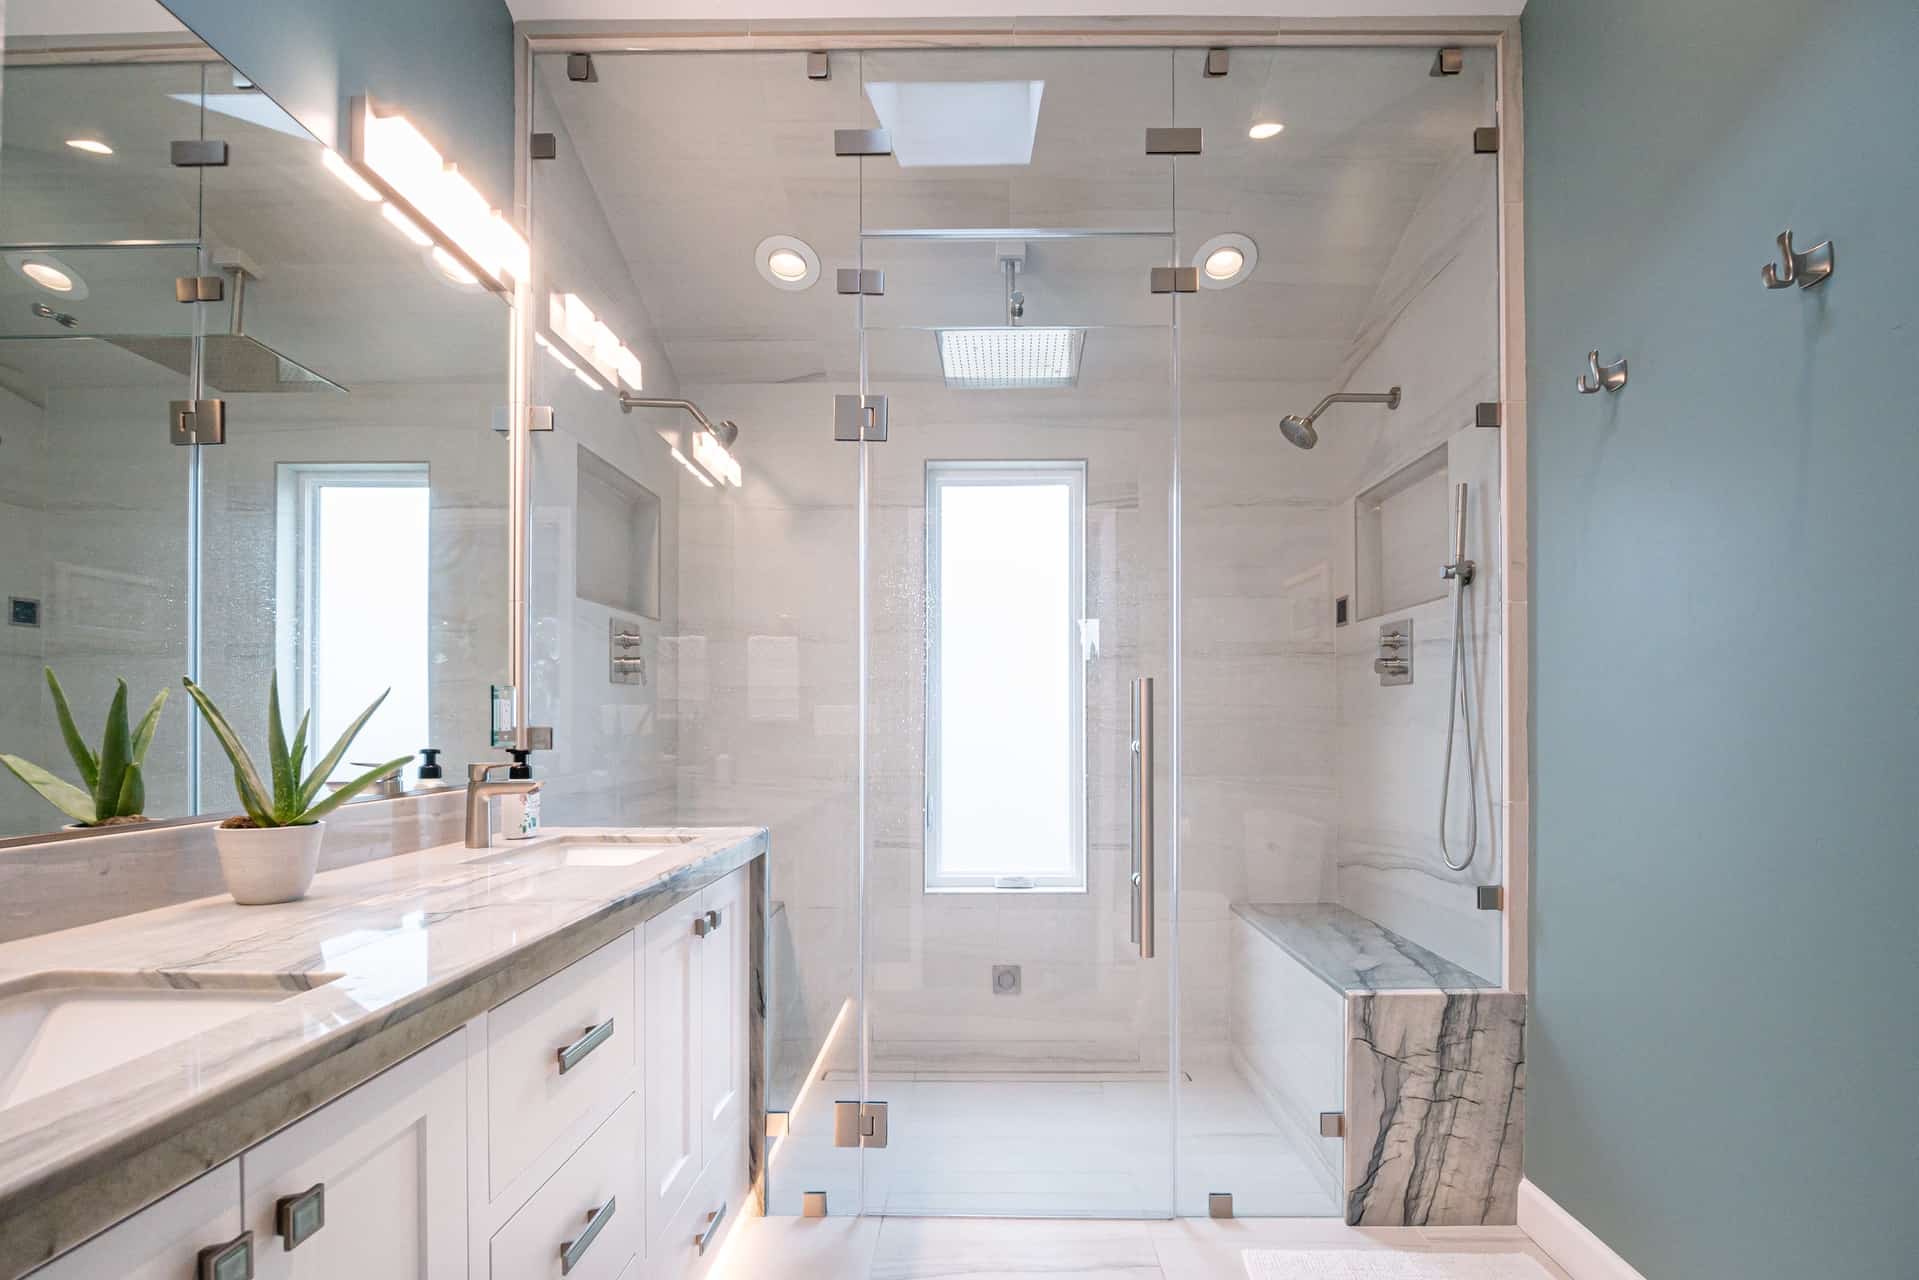 5 signs you shouldn't wait any longer to consider bathroom remodeling